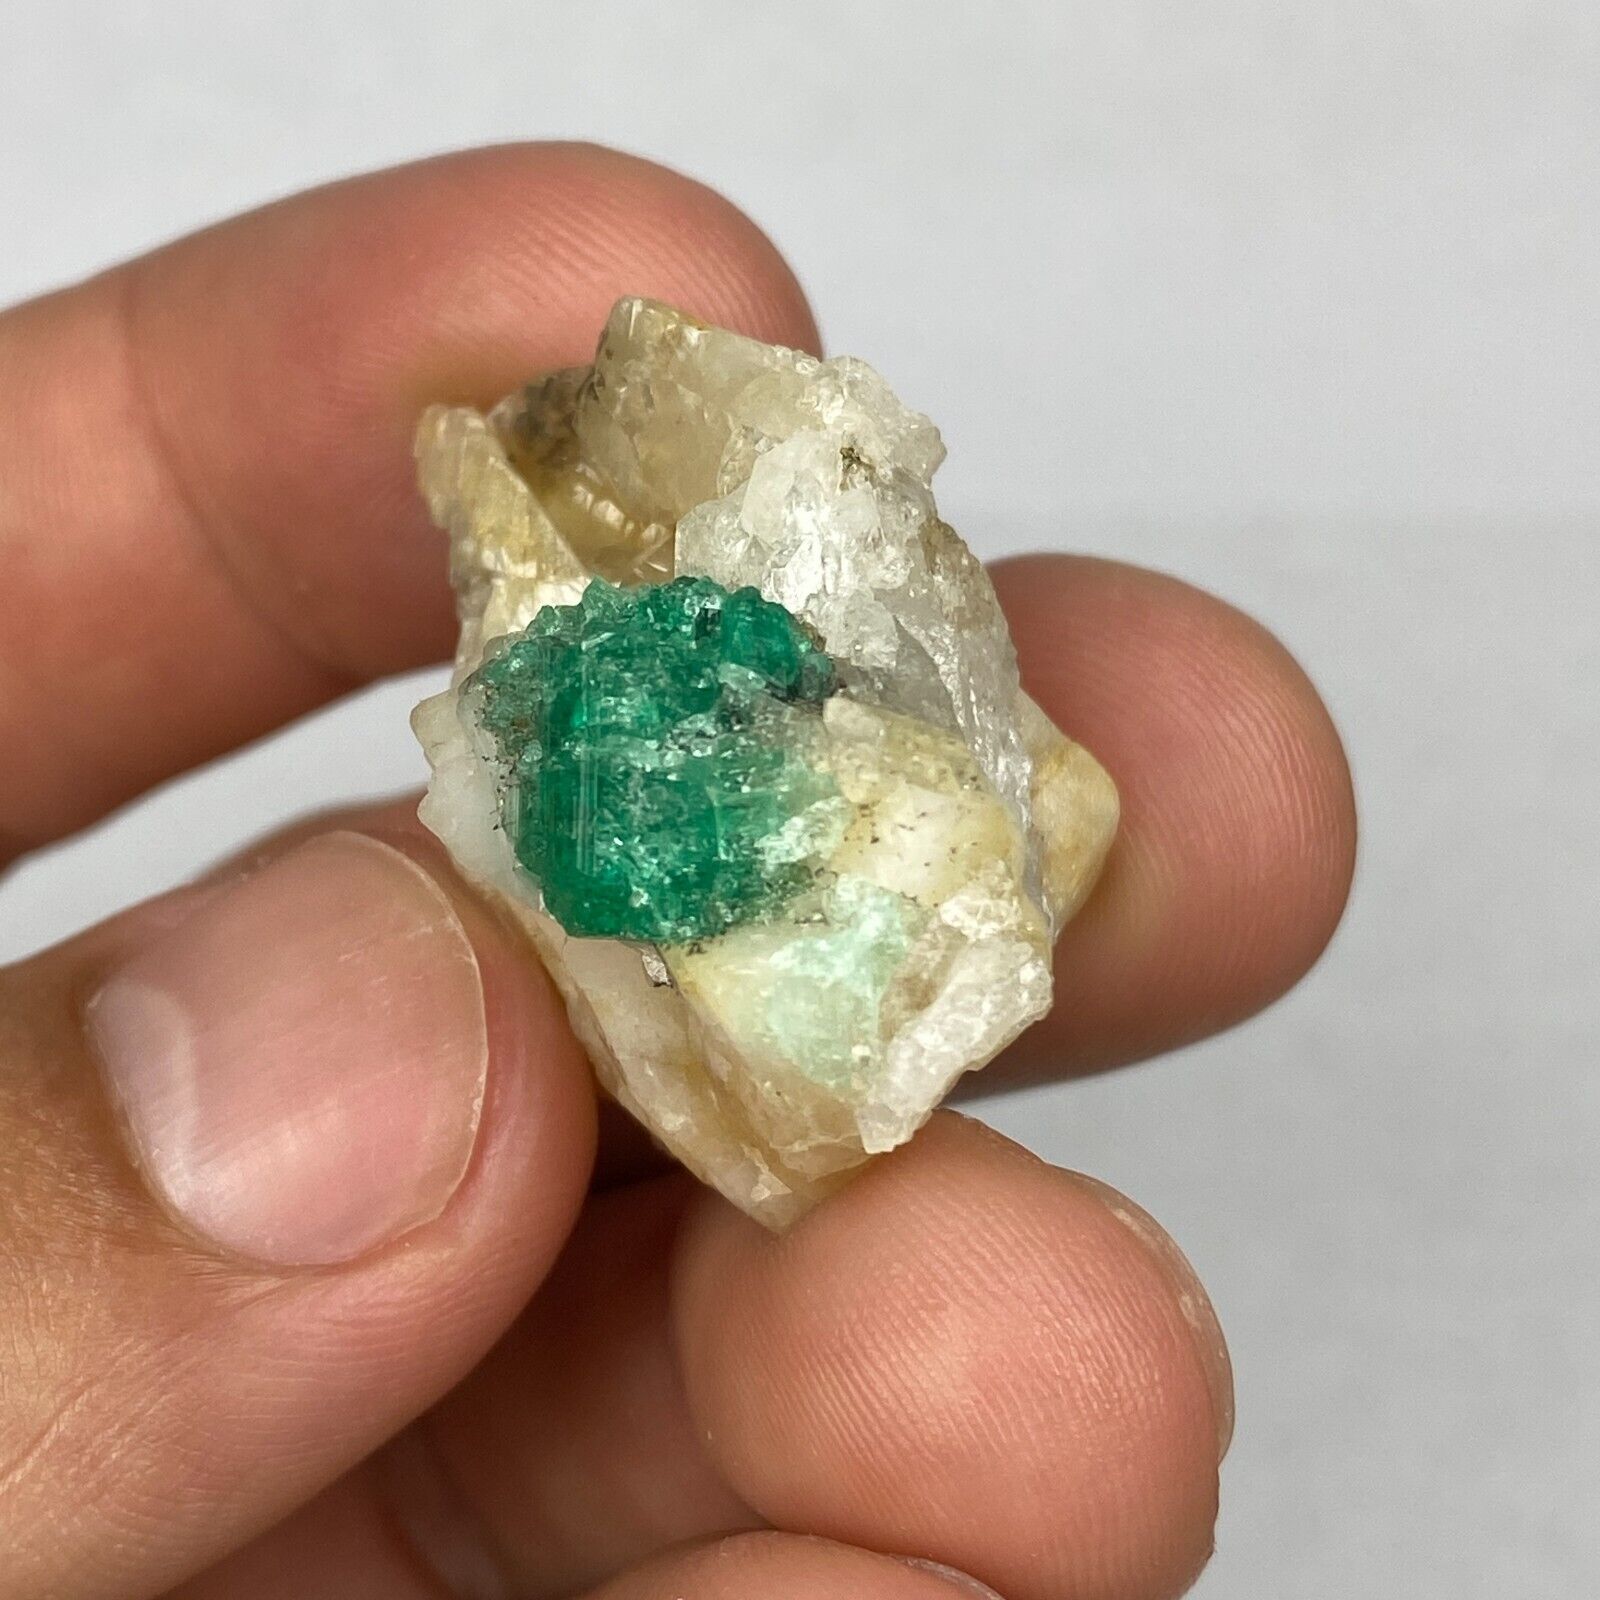 VERY CLEAR NATURAL EMERALD CRYSTAL ON MATRIX  FROM MUZO COLOMBIA 18.64 grams